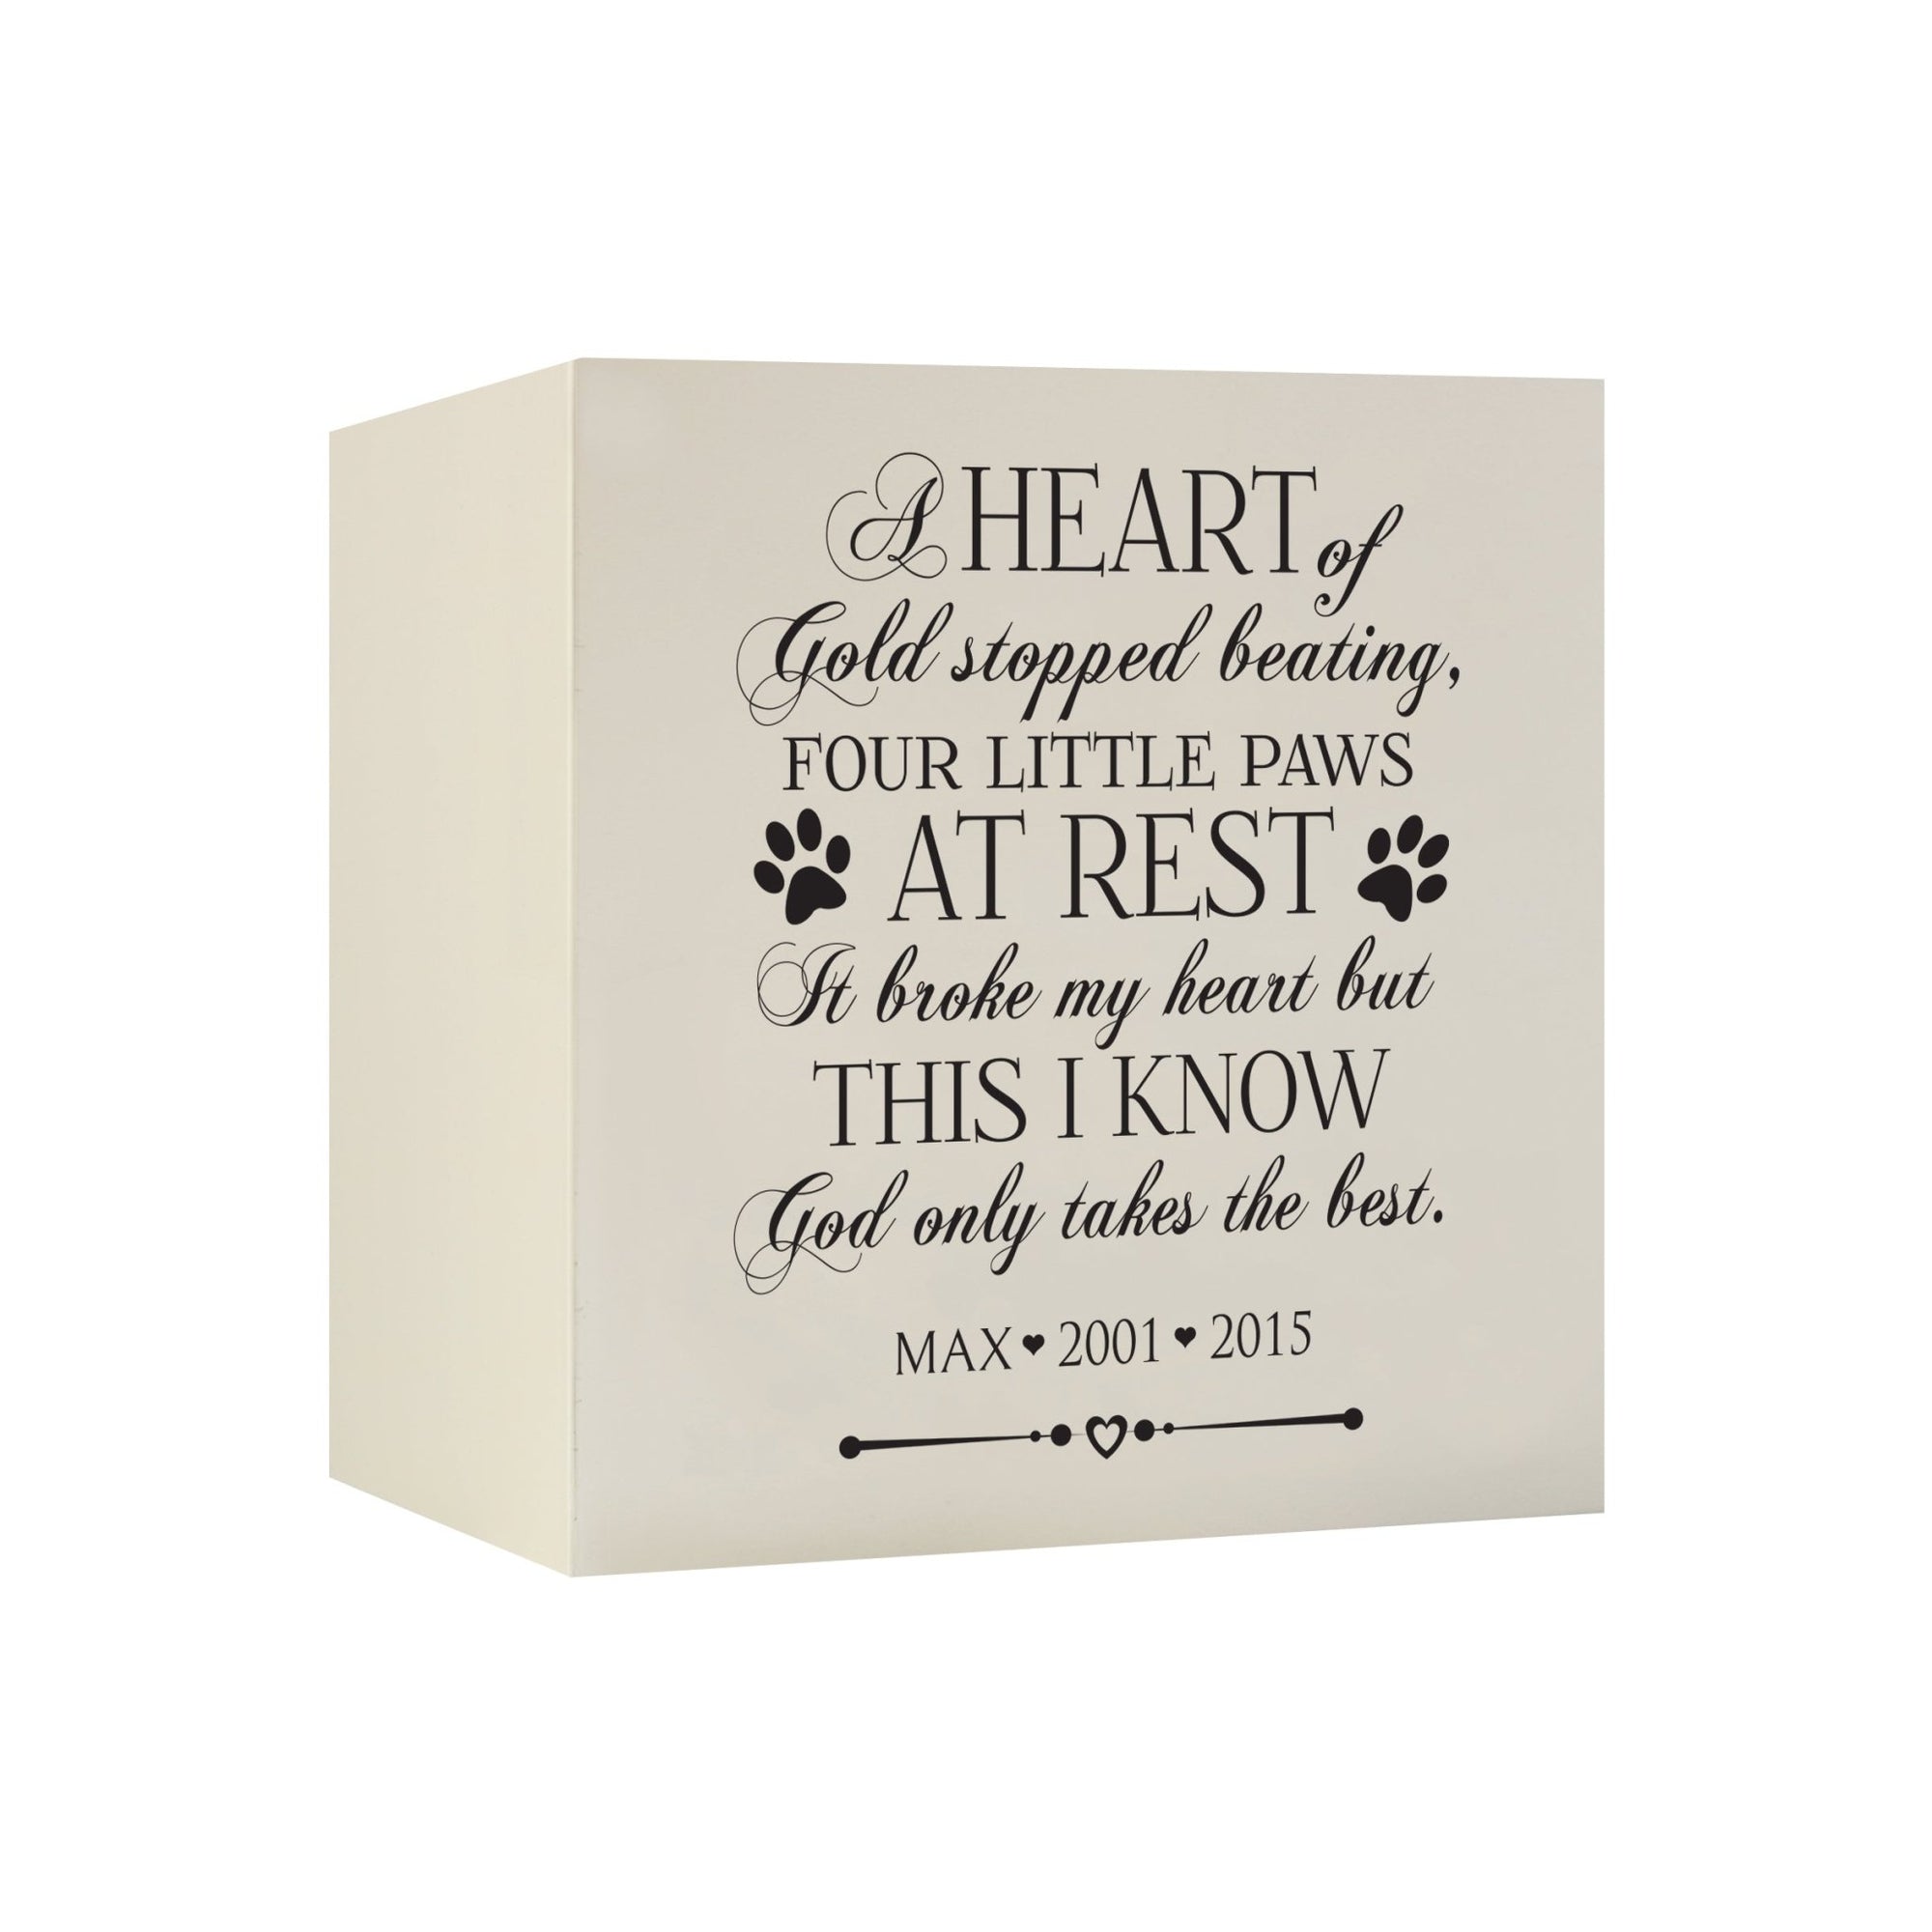 Pet Memorial Shadow Box Cremation Urn for Dog or Cat - A Heart Of Gold - LifeSong Milestones